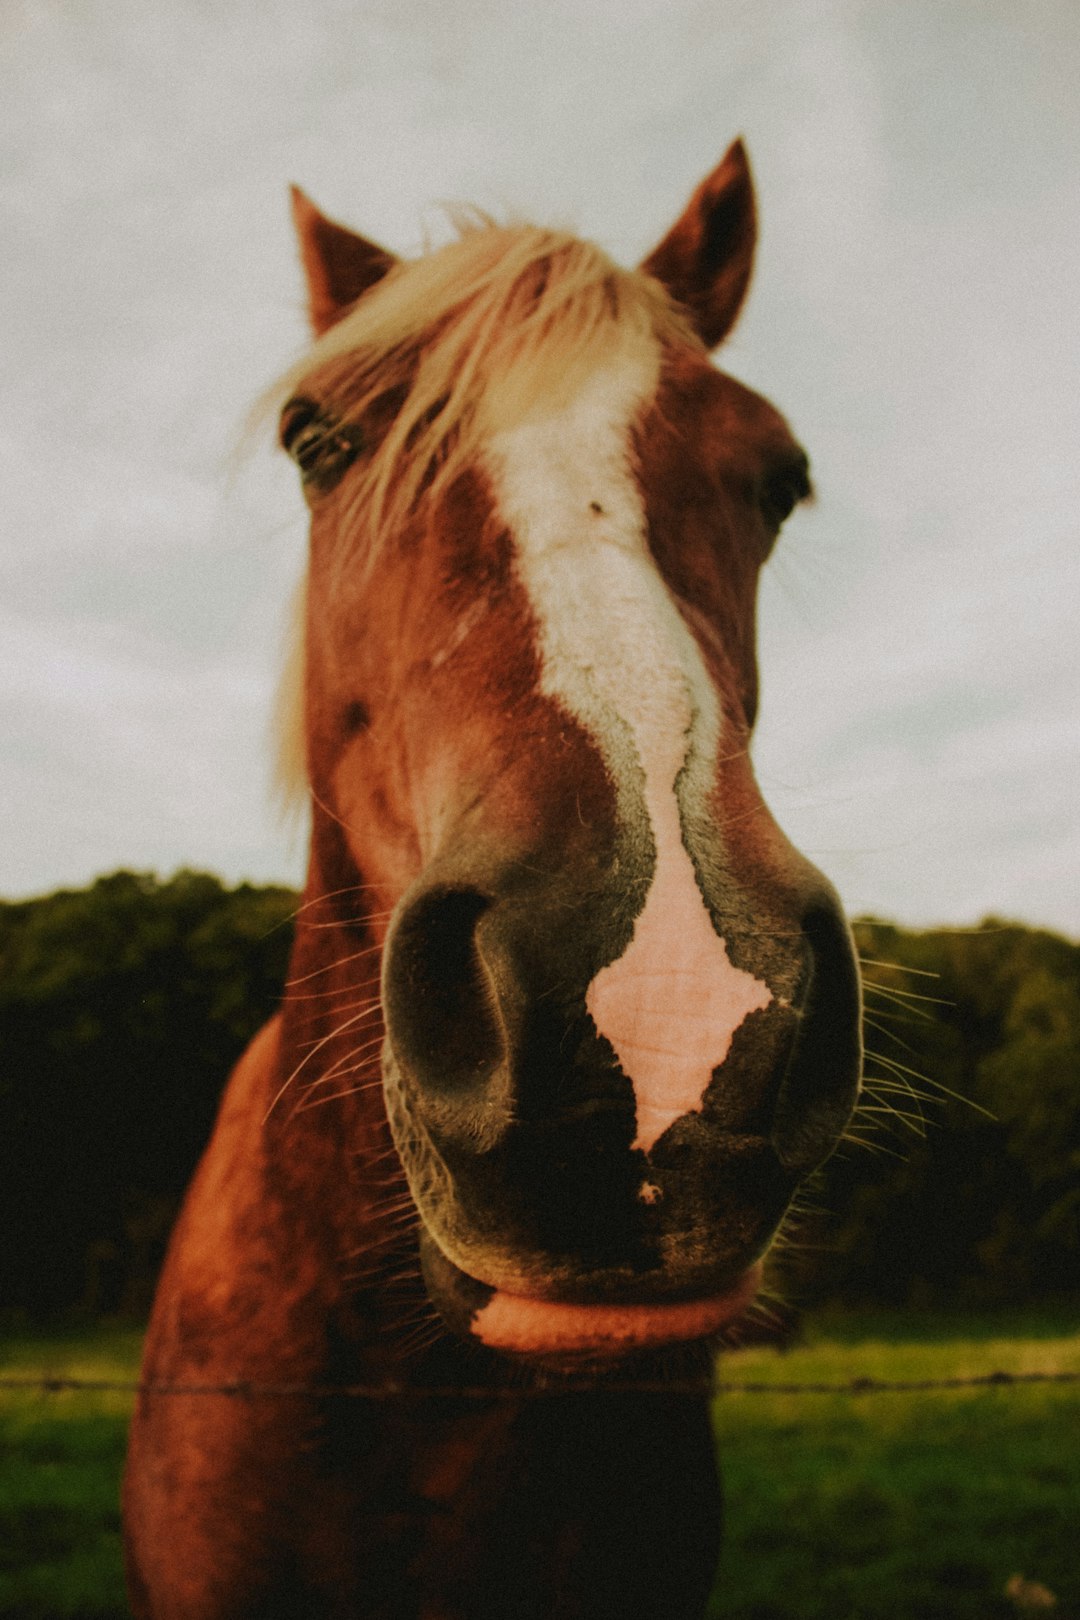 brown and white horse in close-up photography during daytime